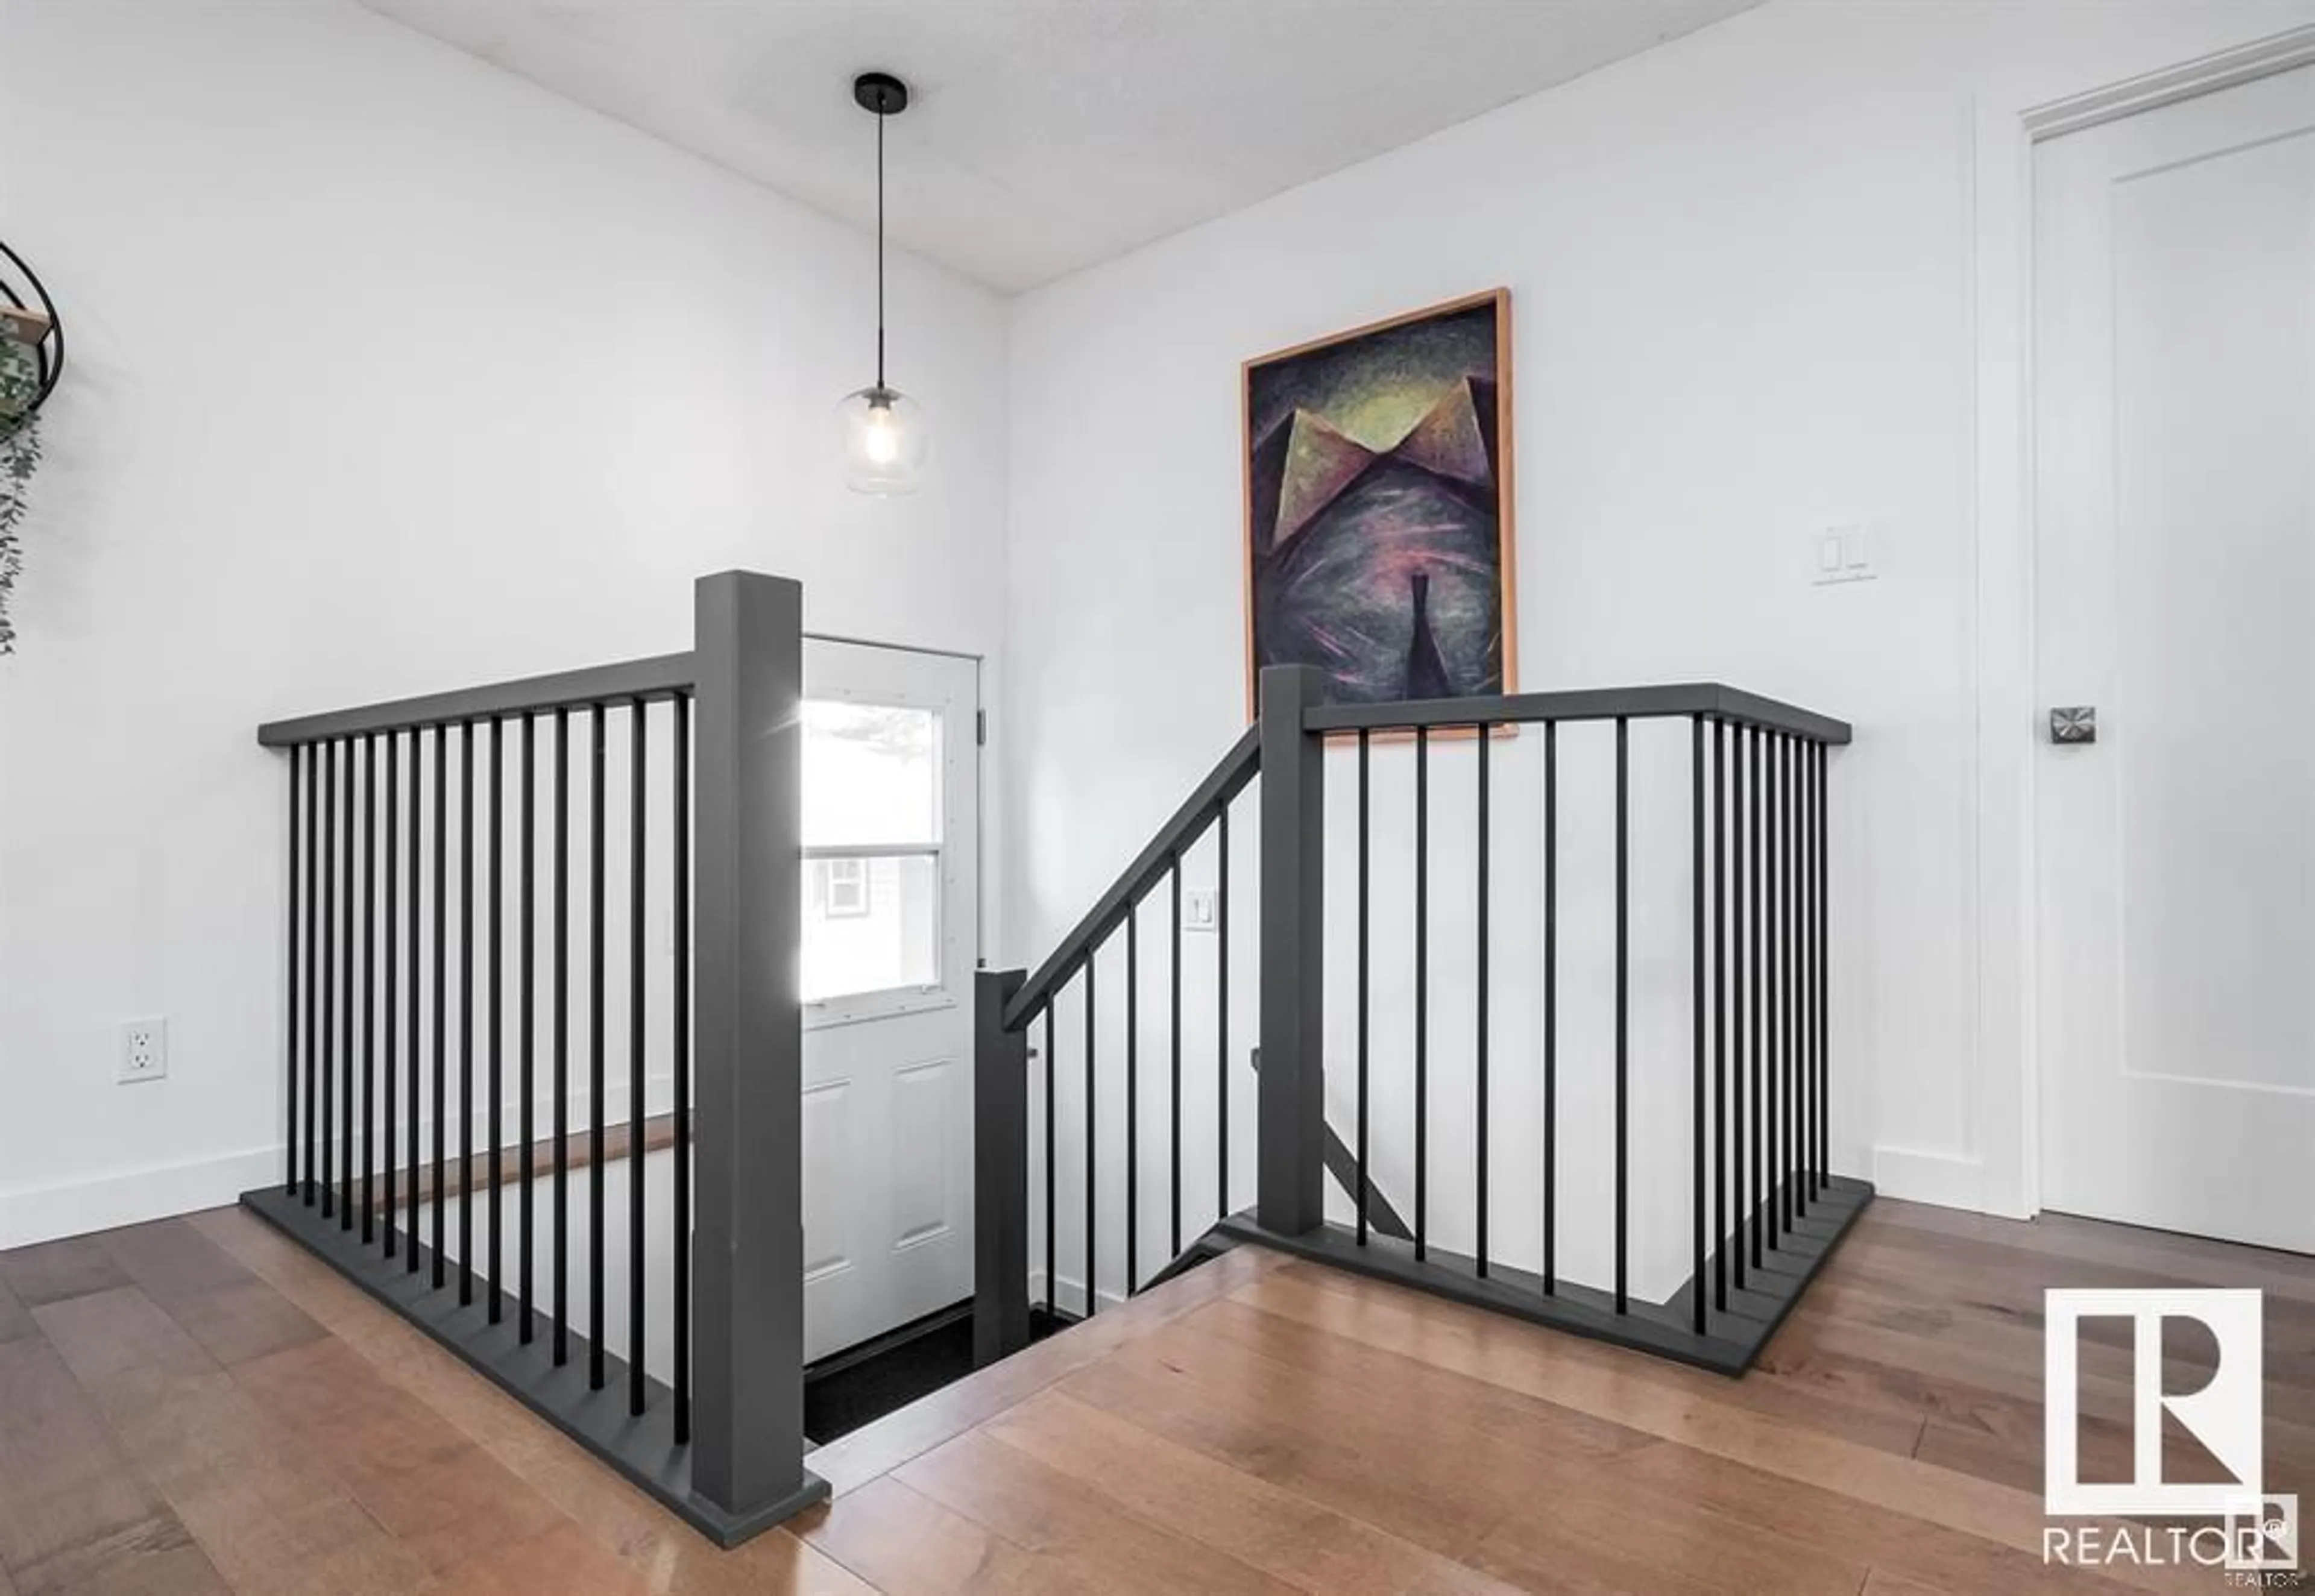 Stairs for 1820 35 ST NW, Edmonton Alberta T6L3E9